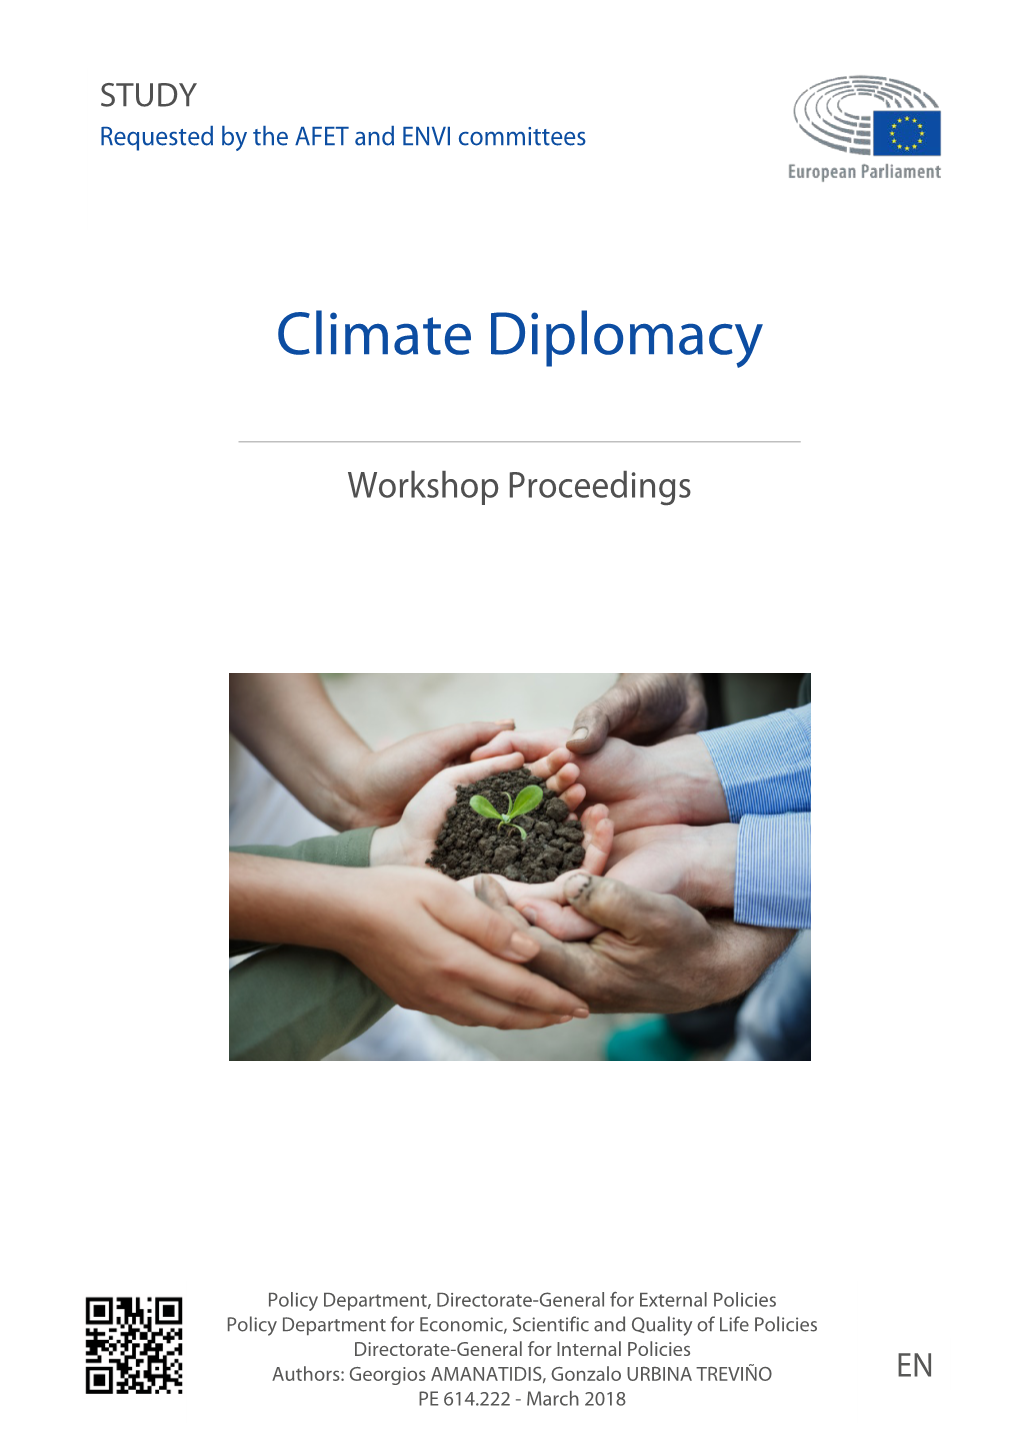 Climate Diplomacy